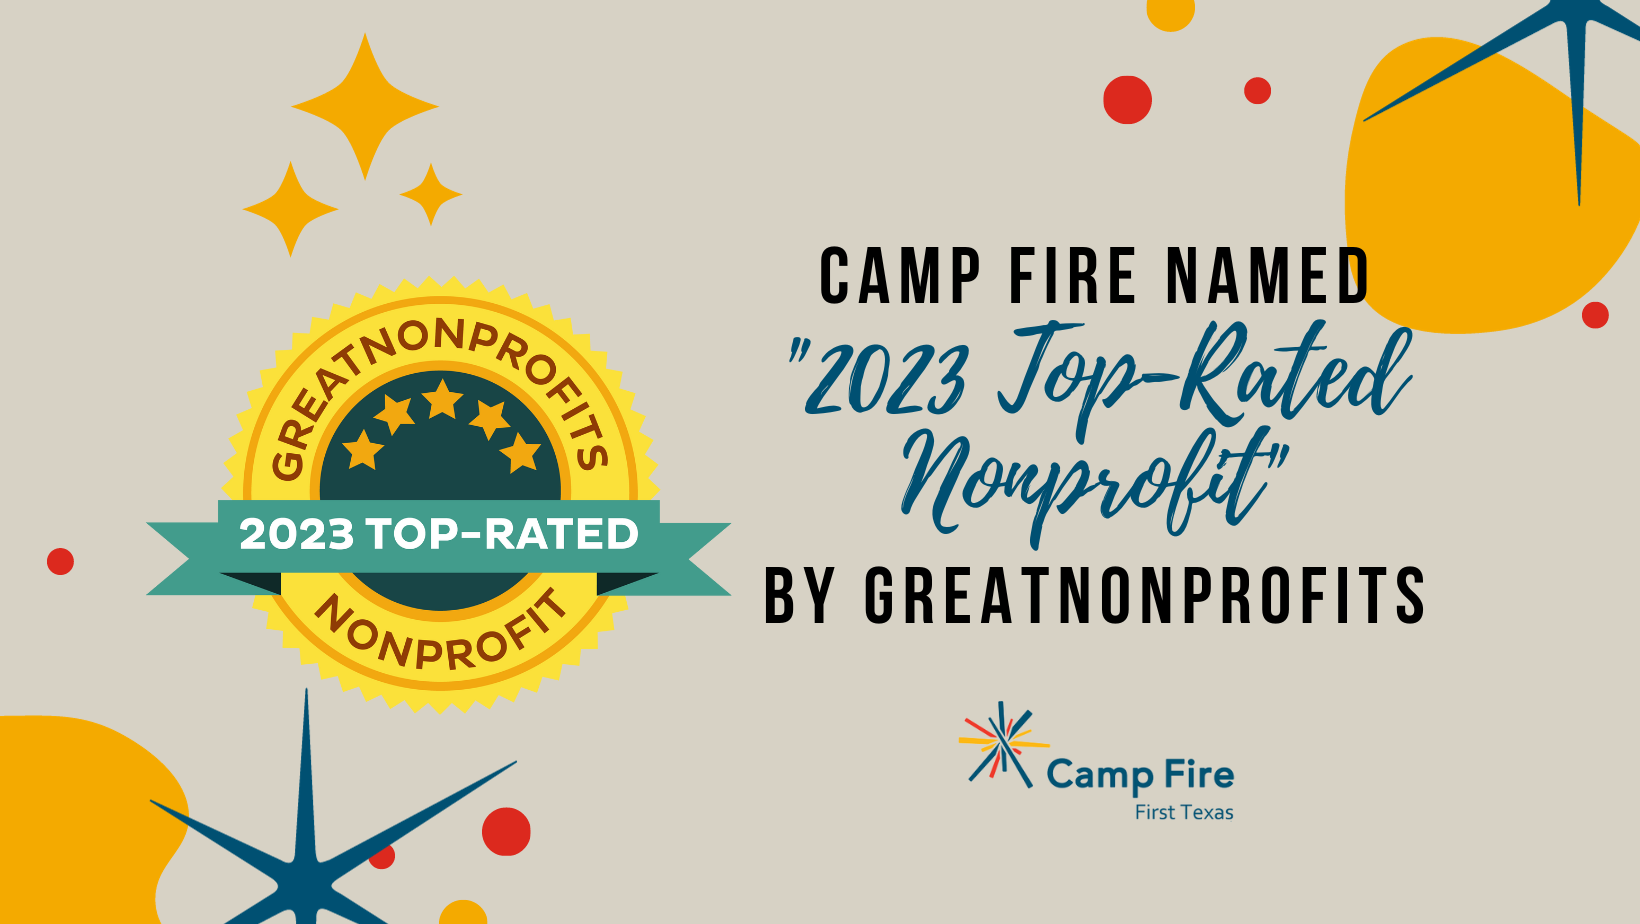 Camp Fire First Texas Named 2023 Top-Rated Nonprofit by GreatNonprofits